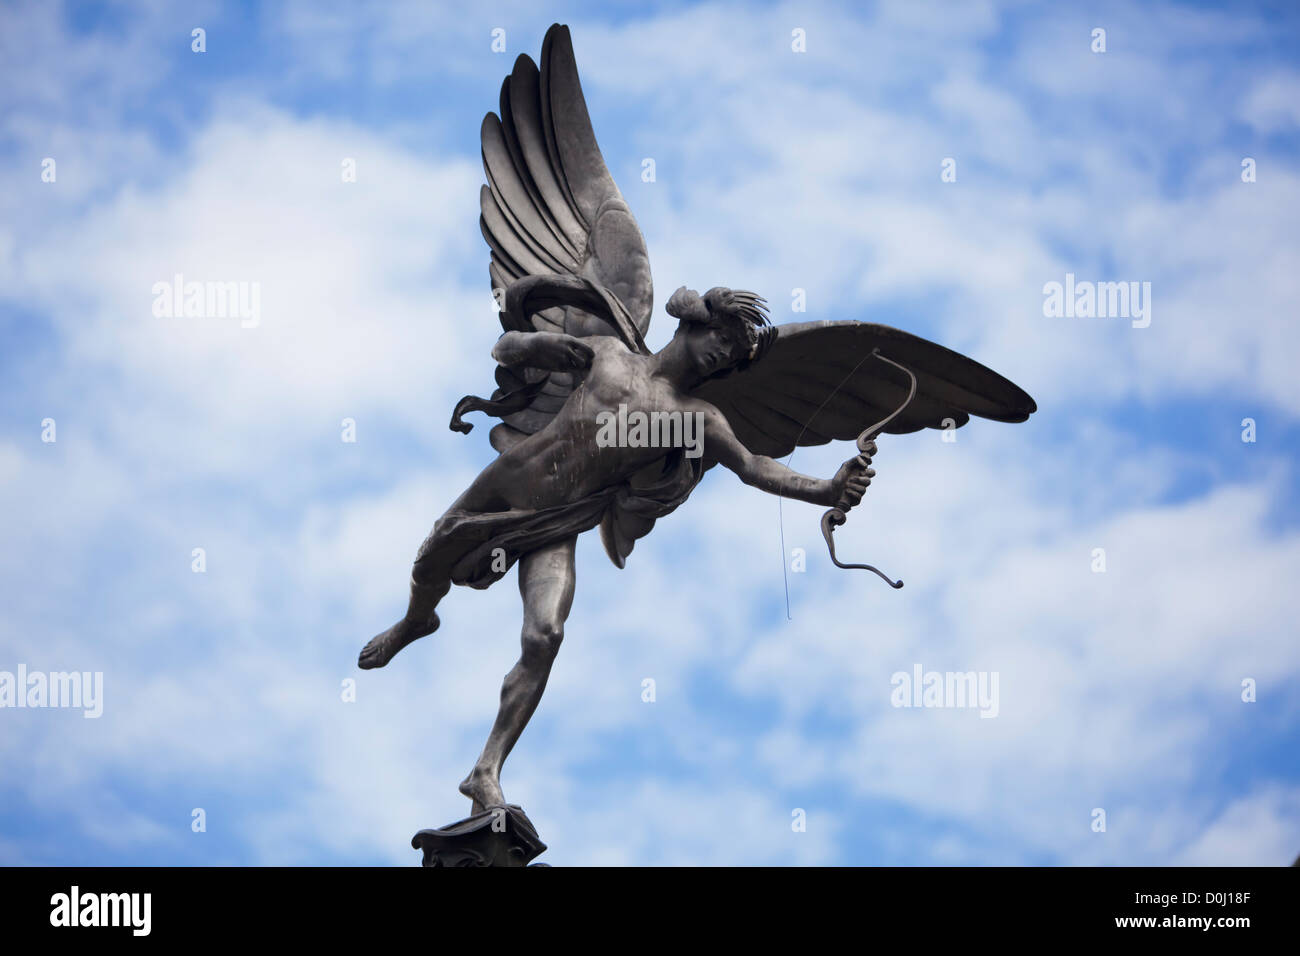 A view of the statue of Anteros perched on top of the Shaftesbury Memorial in Piccadilly Circus. Stock Photo